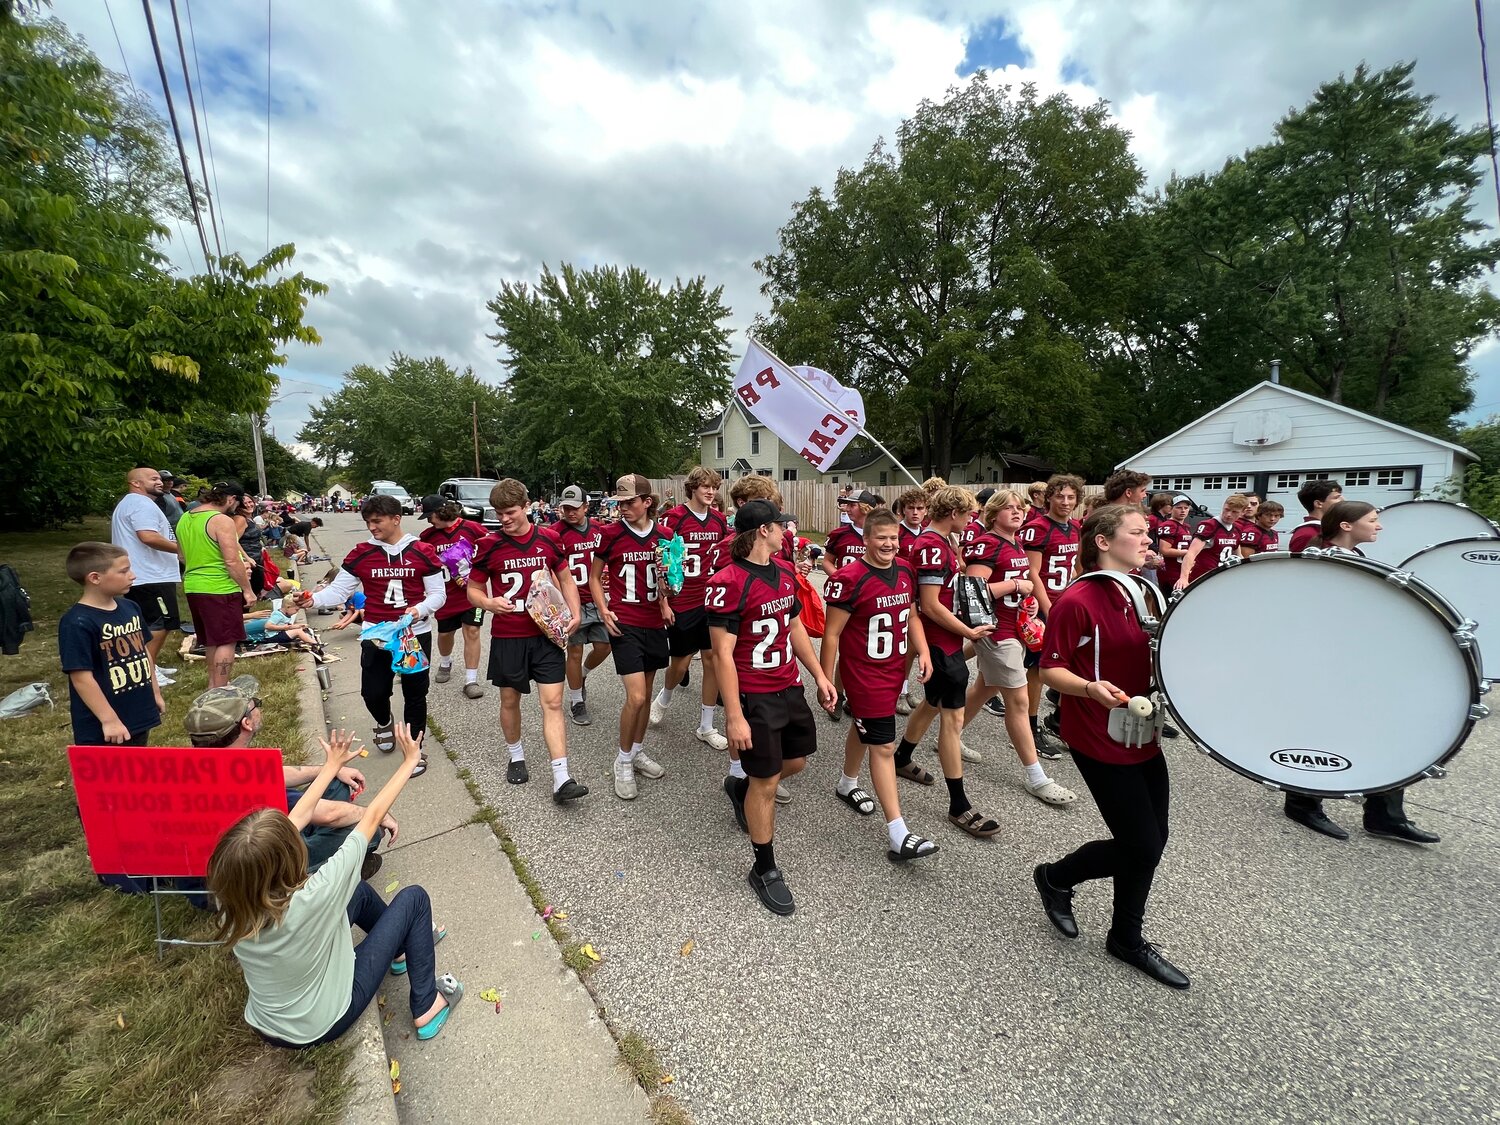 The Prescott Cardinals football team got their Sunday workout in as players marched behind the Prescott High School Marching Band in the Prescott Daze Grand Parade Sunday.